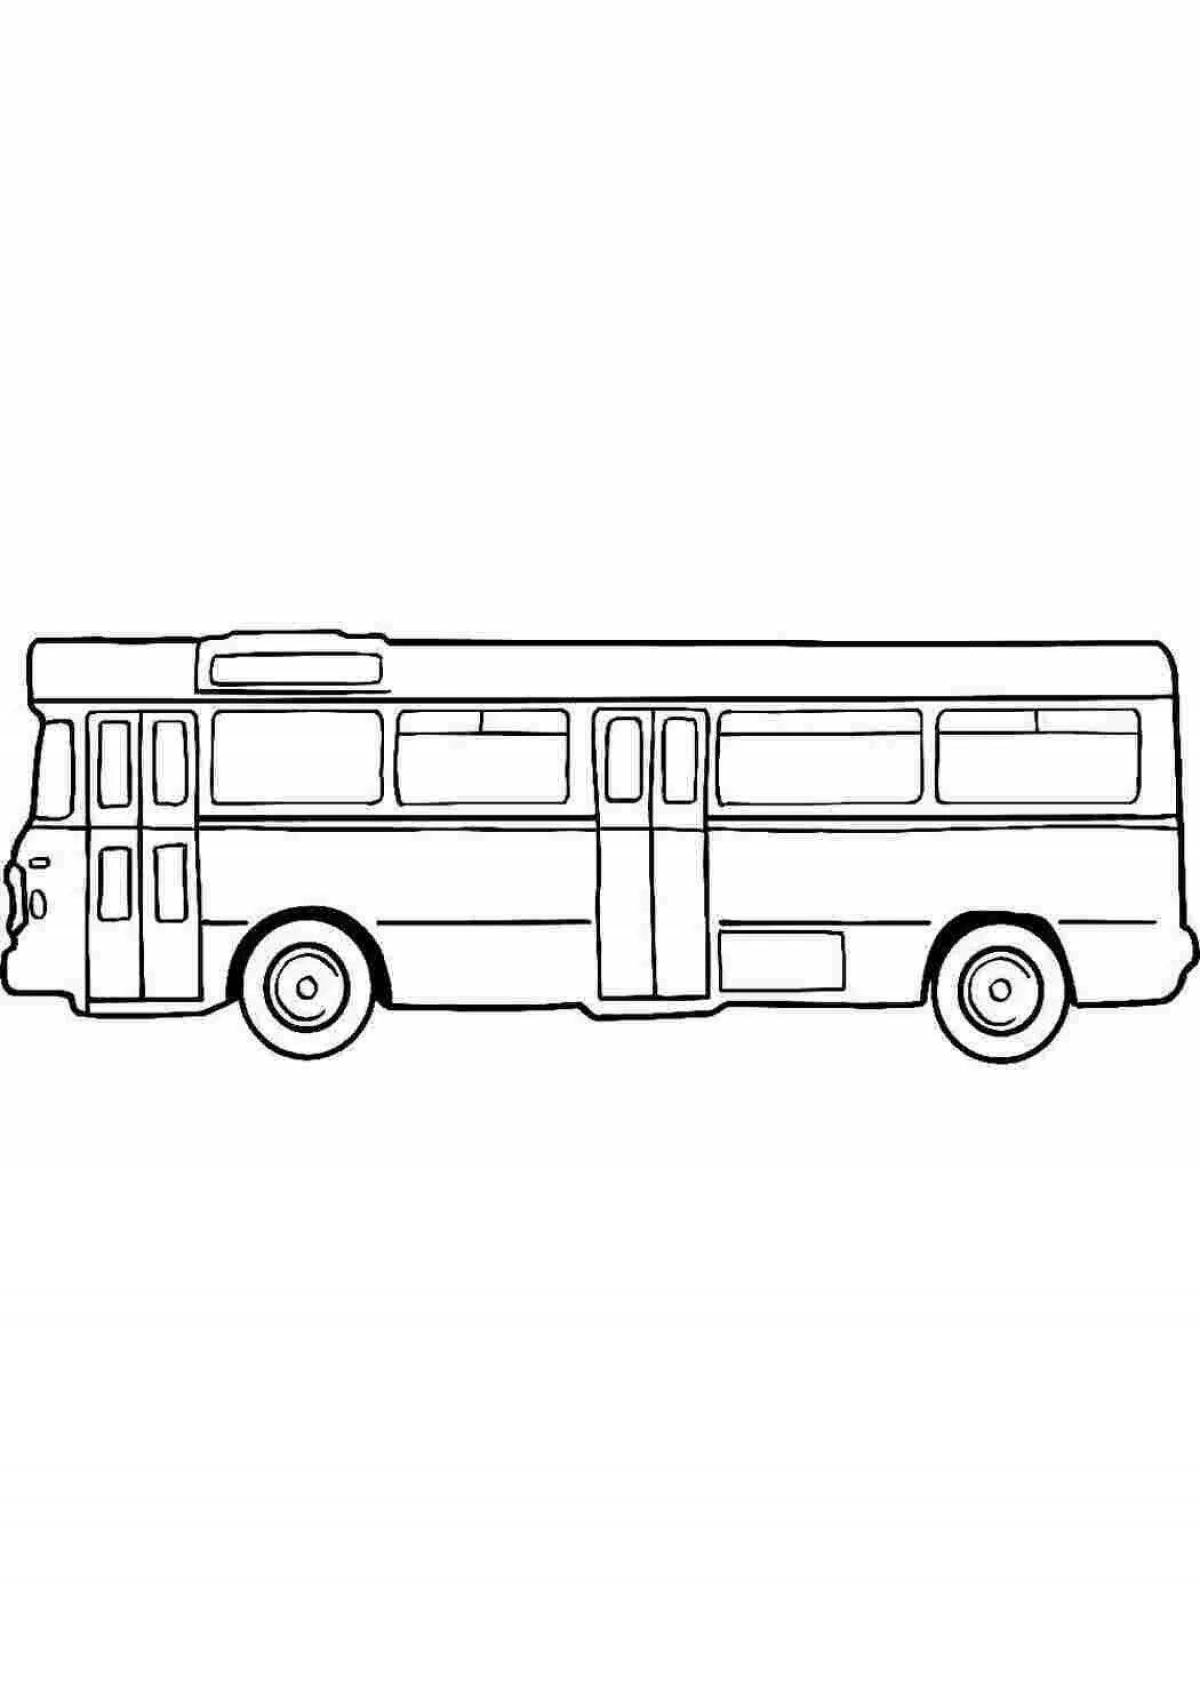 Exciting liaz bus coloring